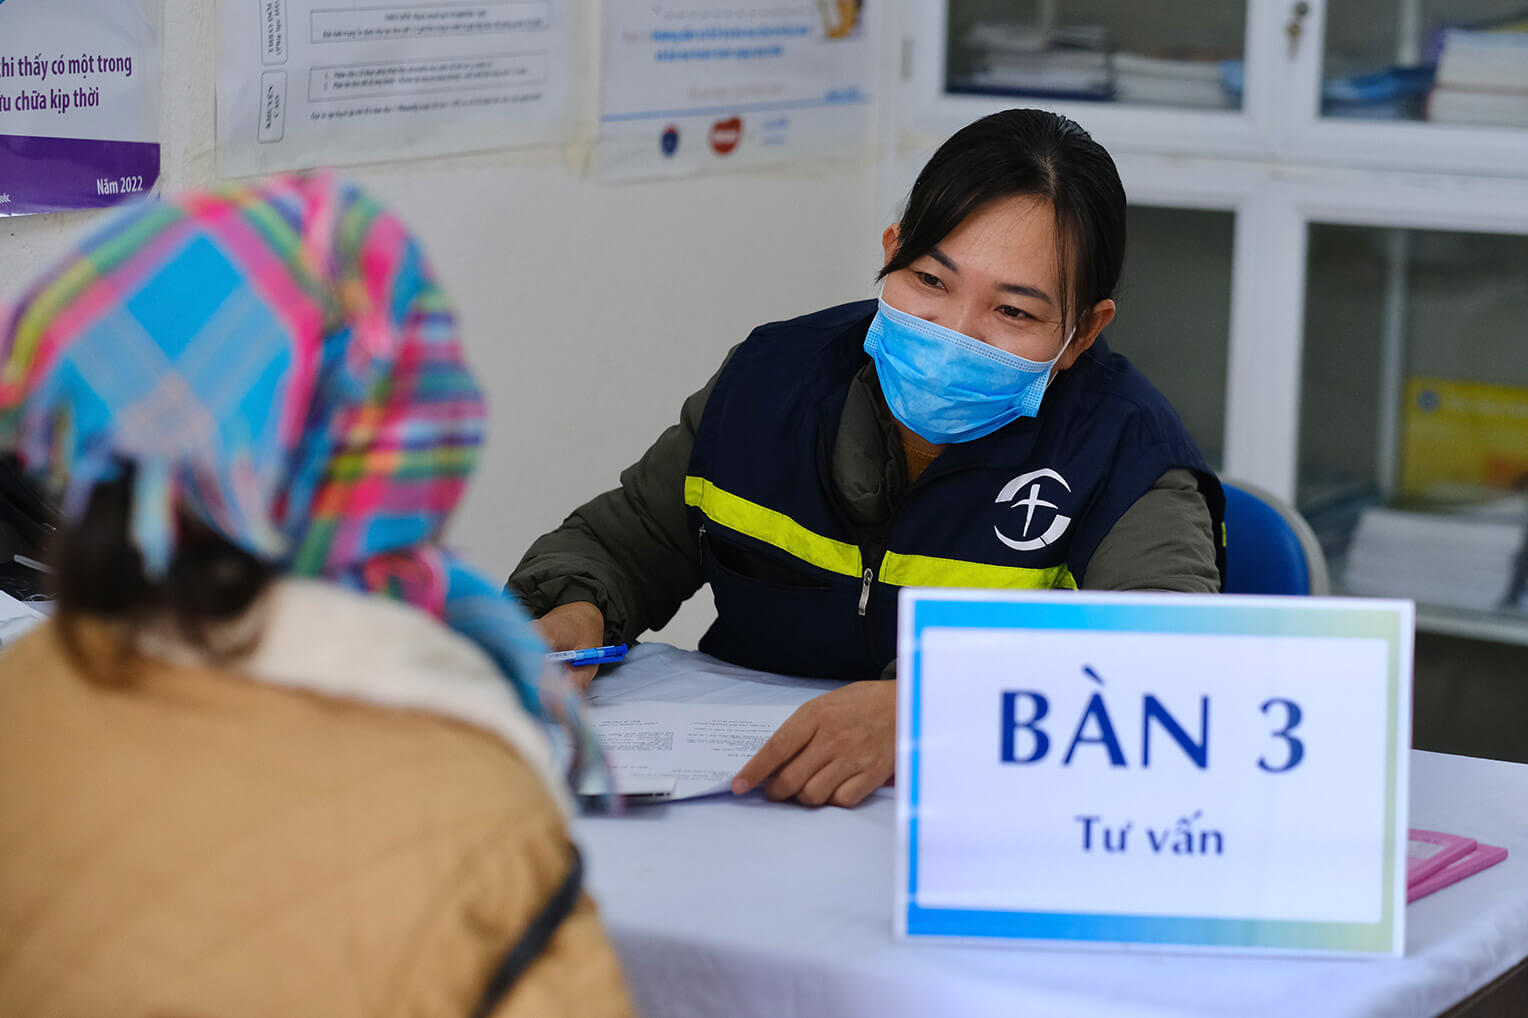 A health care provide signs in an expecting mother for a mobile checkup at a remote clinic in the highlands of Vietnam.